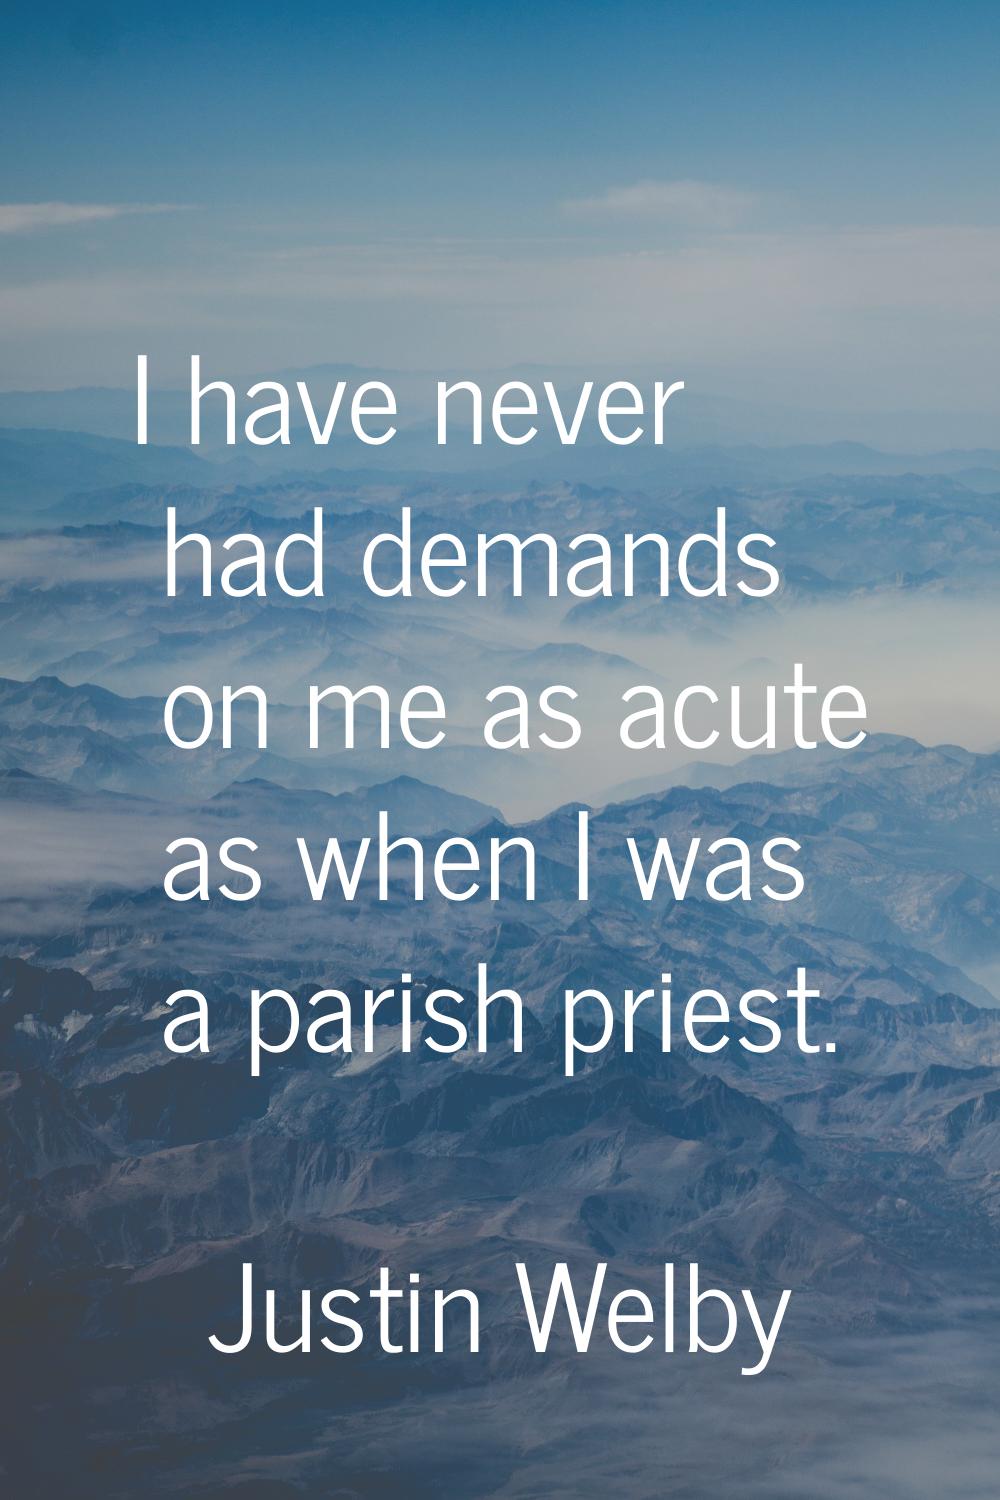 I have never had demands on me as acute as when I was a parish priest.